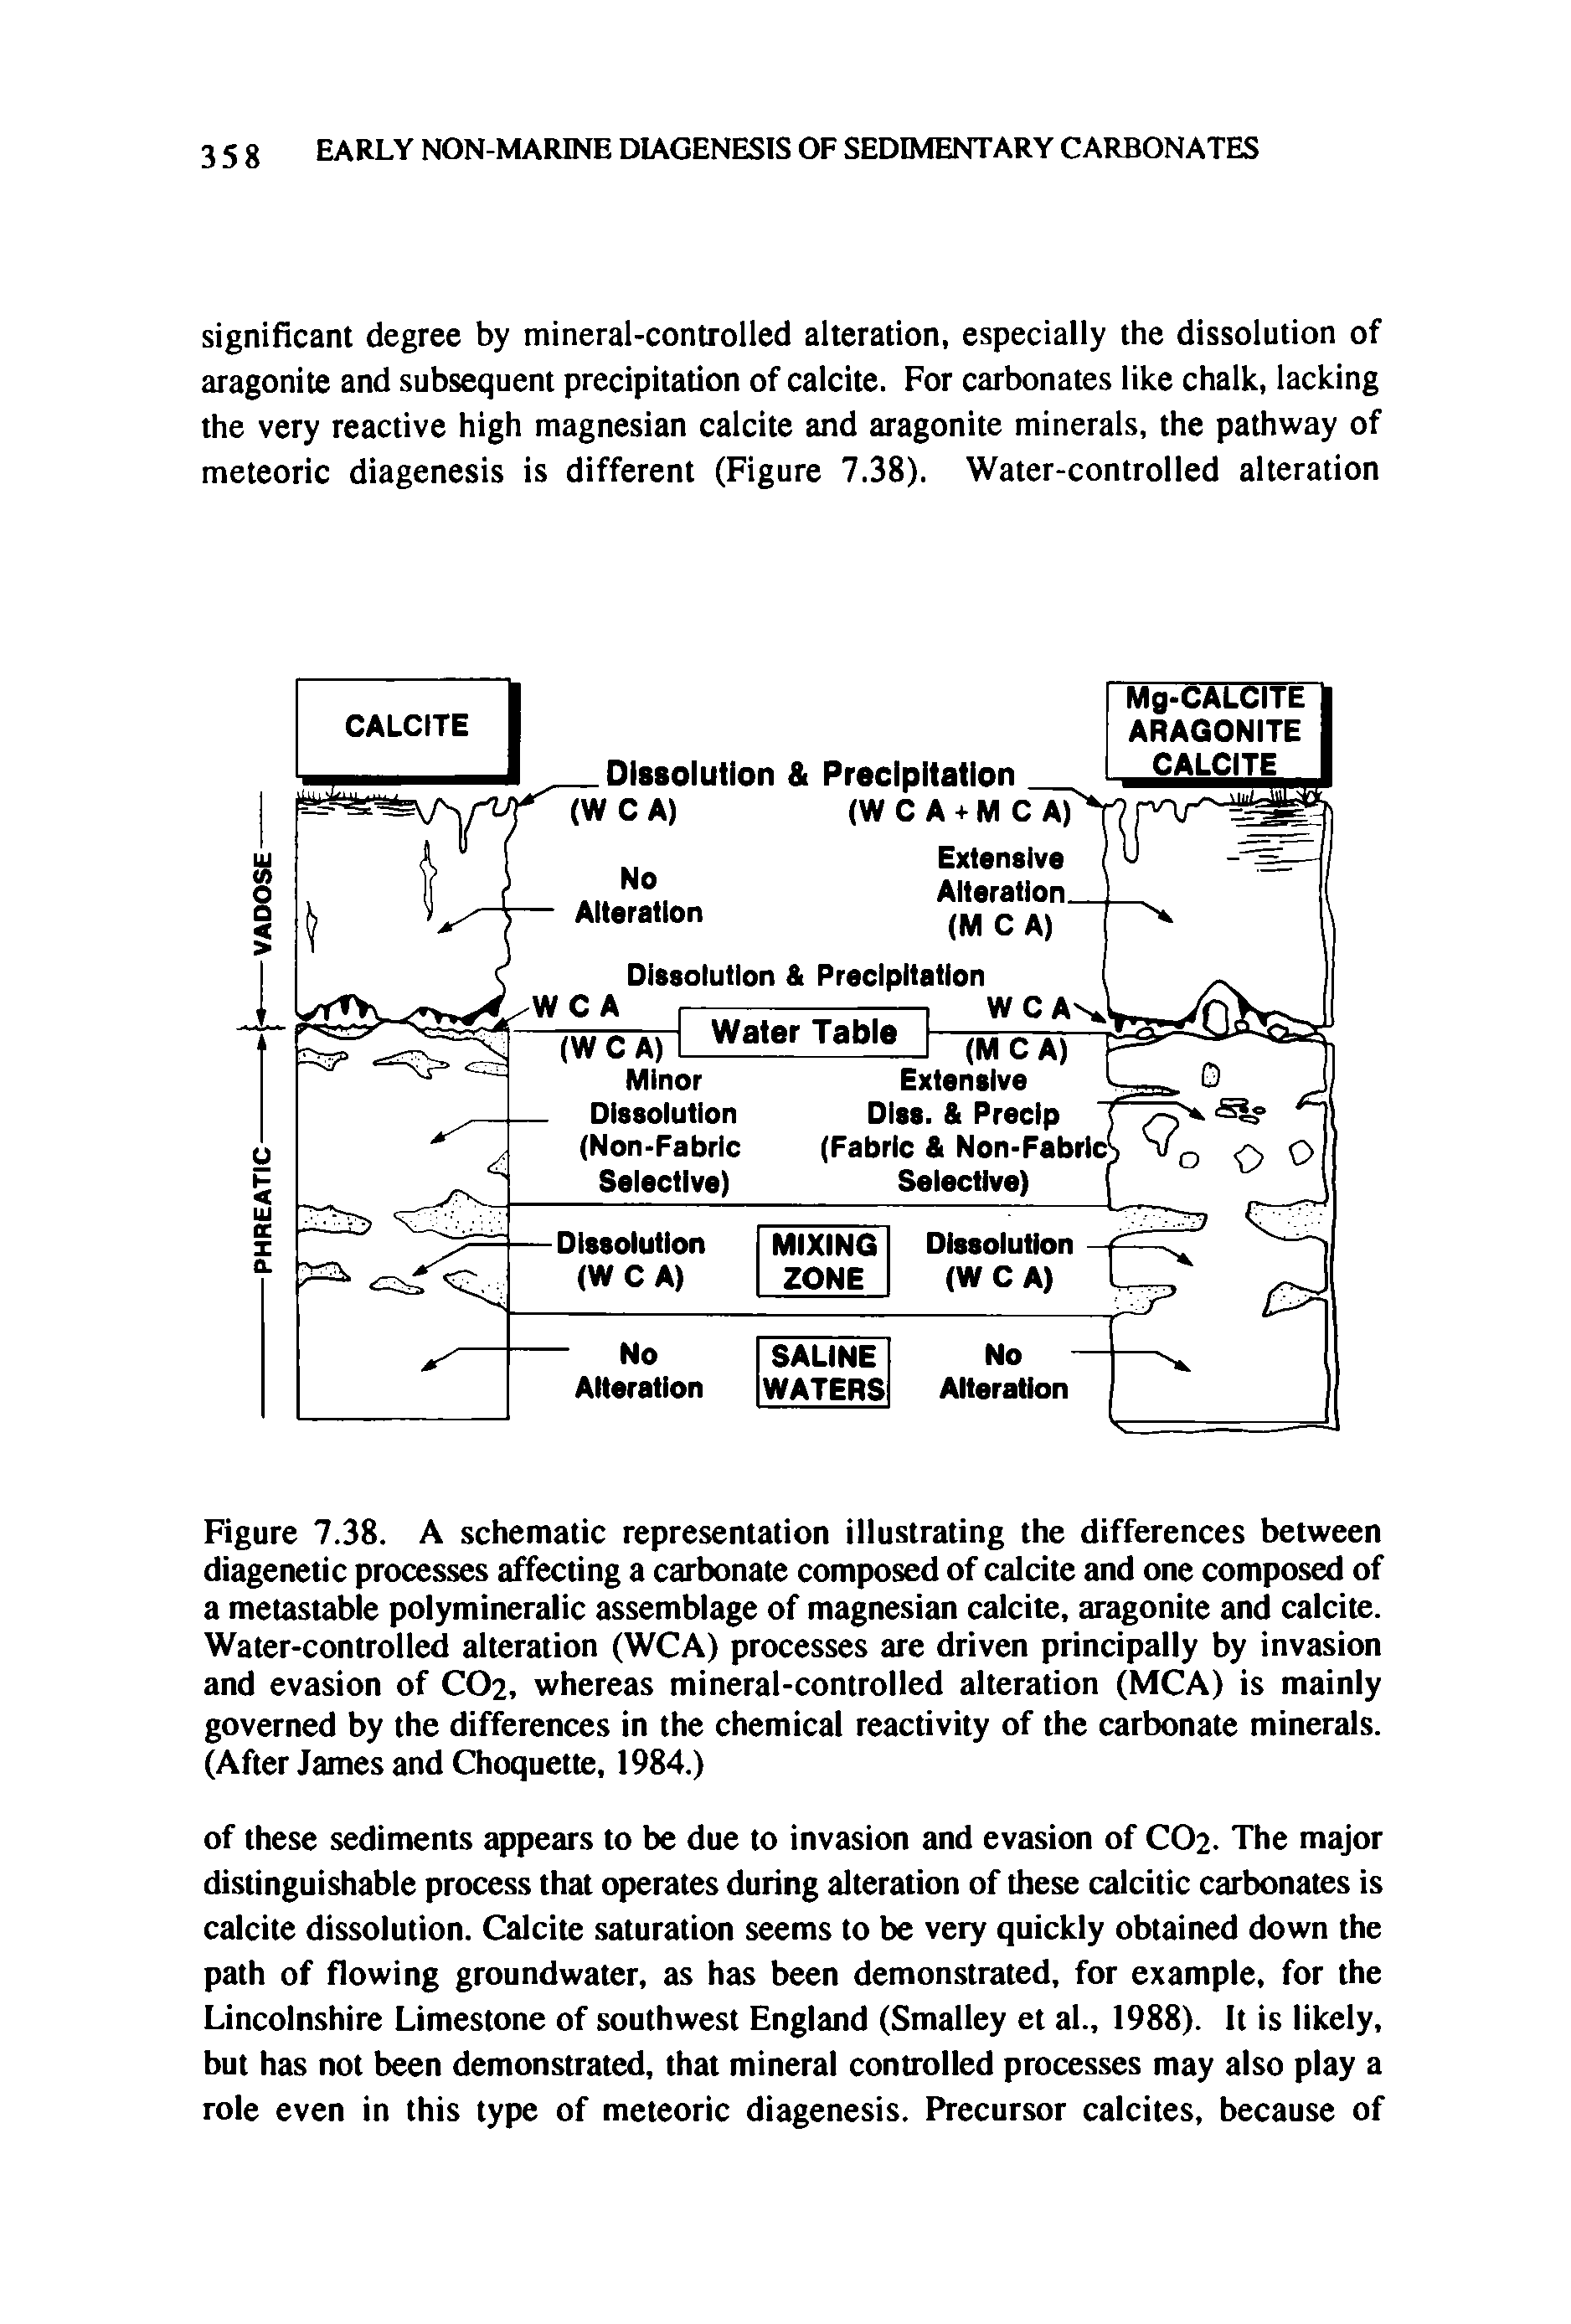 Figure 7.38. A schematic representation illustrating the differences between diagenetic processes affecting a carbonate composed of calcite and one composed of a metastable polymineralic assemblage of magnesian calcite, aragonite and calcite. Water-controlled alteration (WCA) processes are driven principally by invasion and evasion of CO2, whereas mineral-controlled alteration (MCA) is mainly governed by the differences in the chemical reactivity of the carbonate minerals. (After James and Choquette, 1984.)...